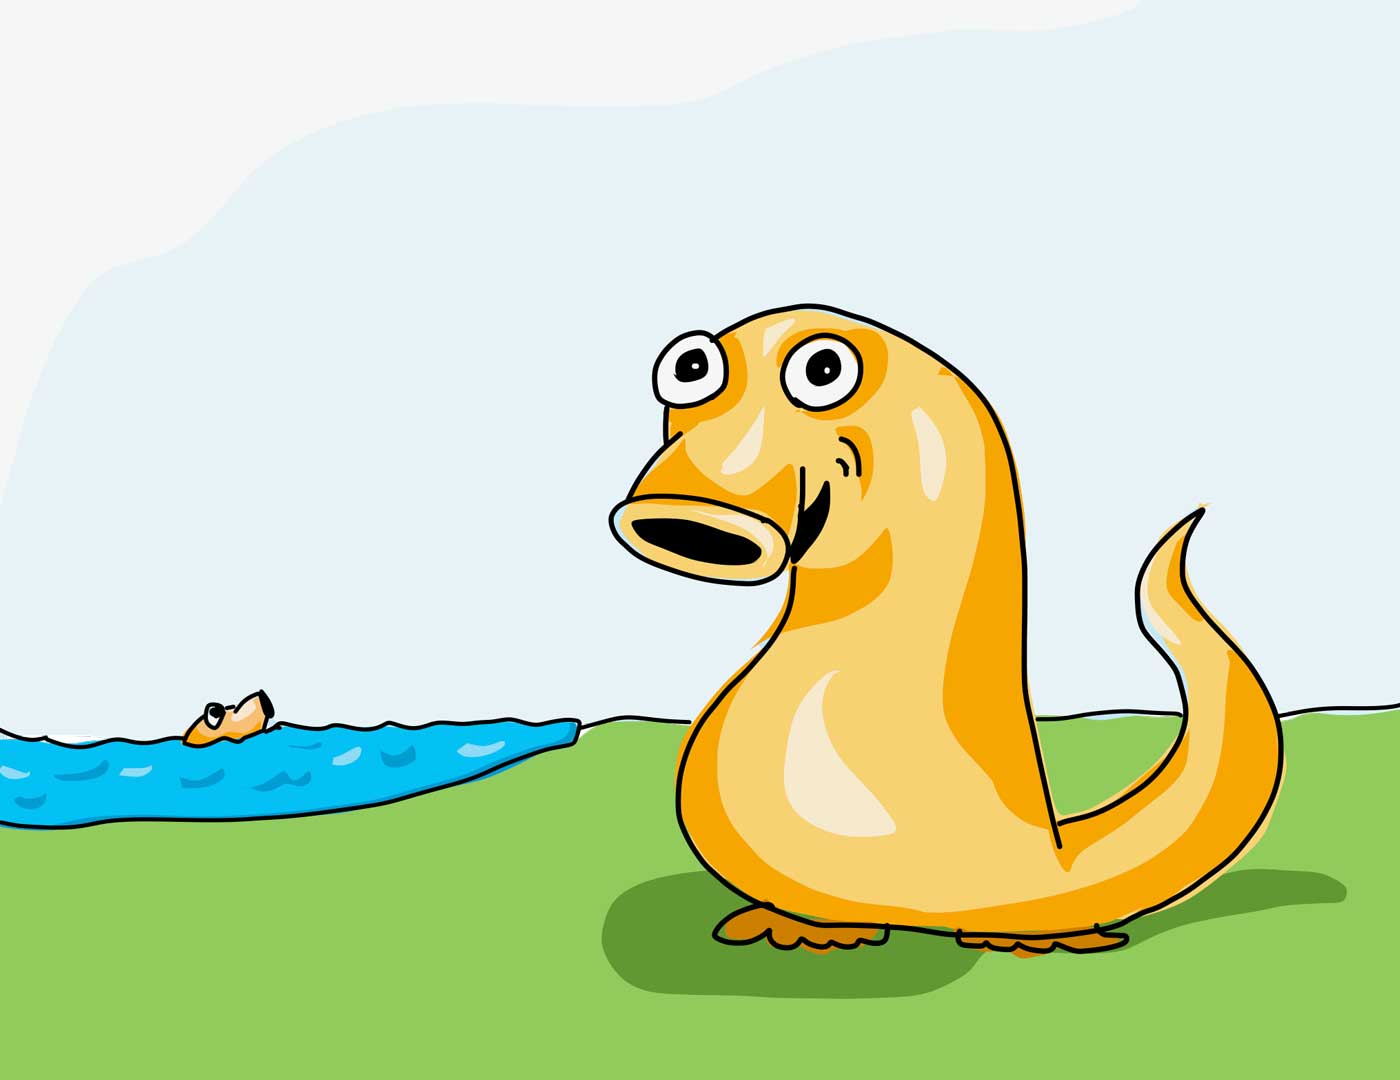 An orange monster with a large nose, tail, and duck-like feet in a meadow in front of a pond with an orange monster peeking above the water